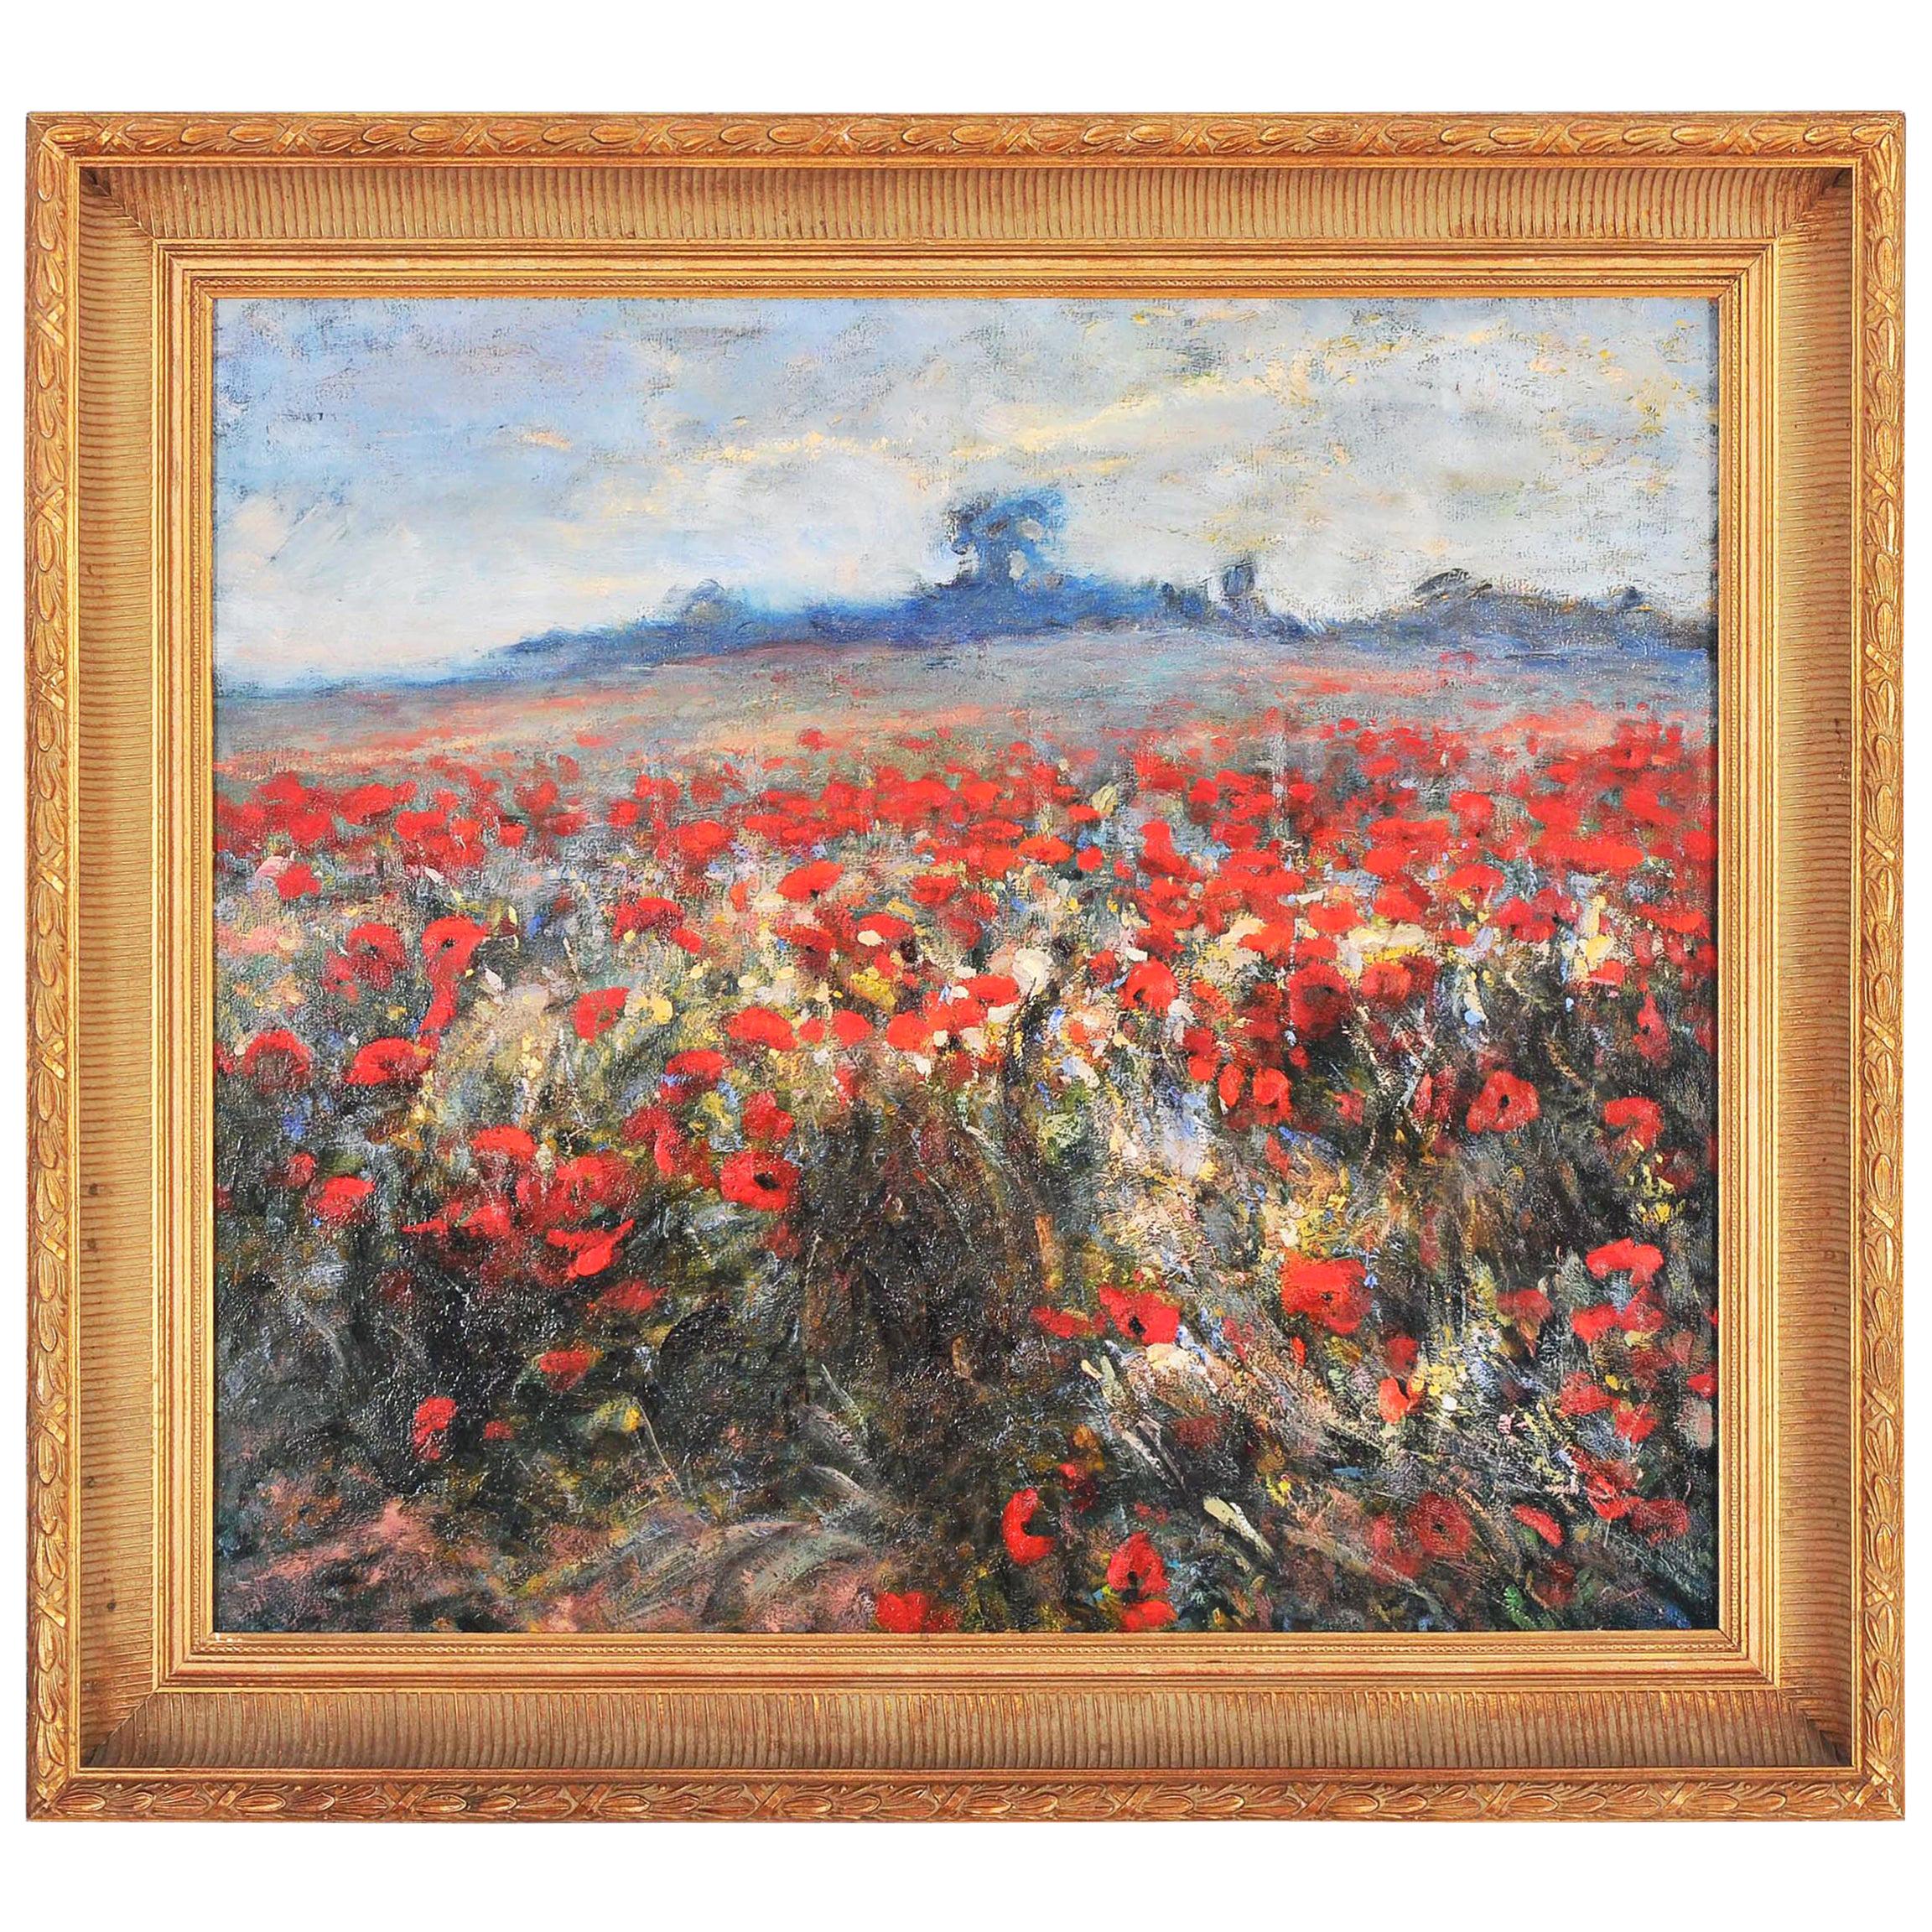 Oil on Canvas titled 'Poppies' by J Wanat